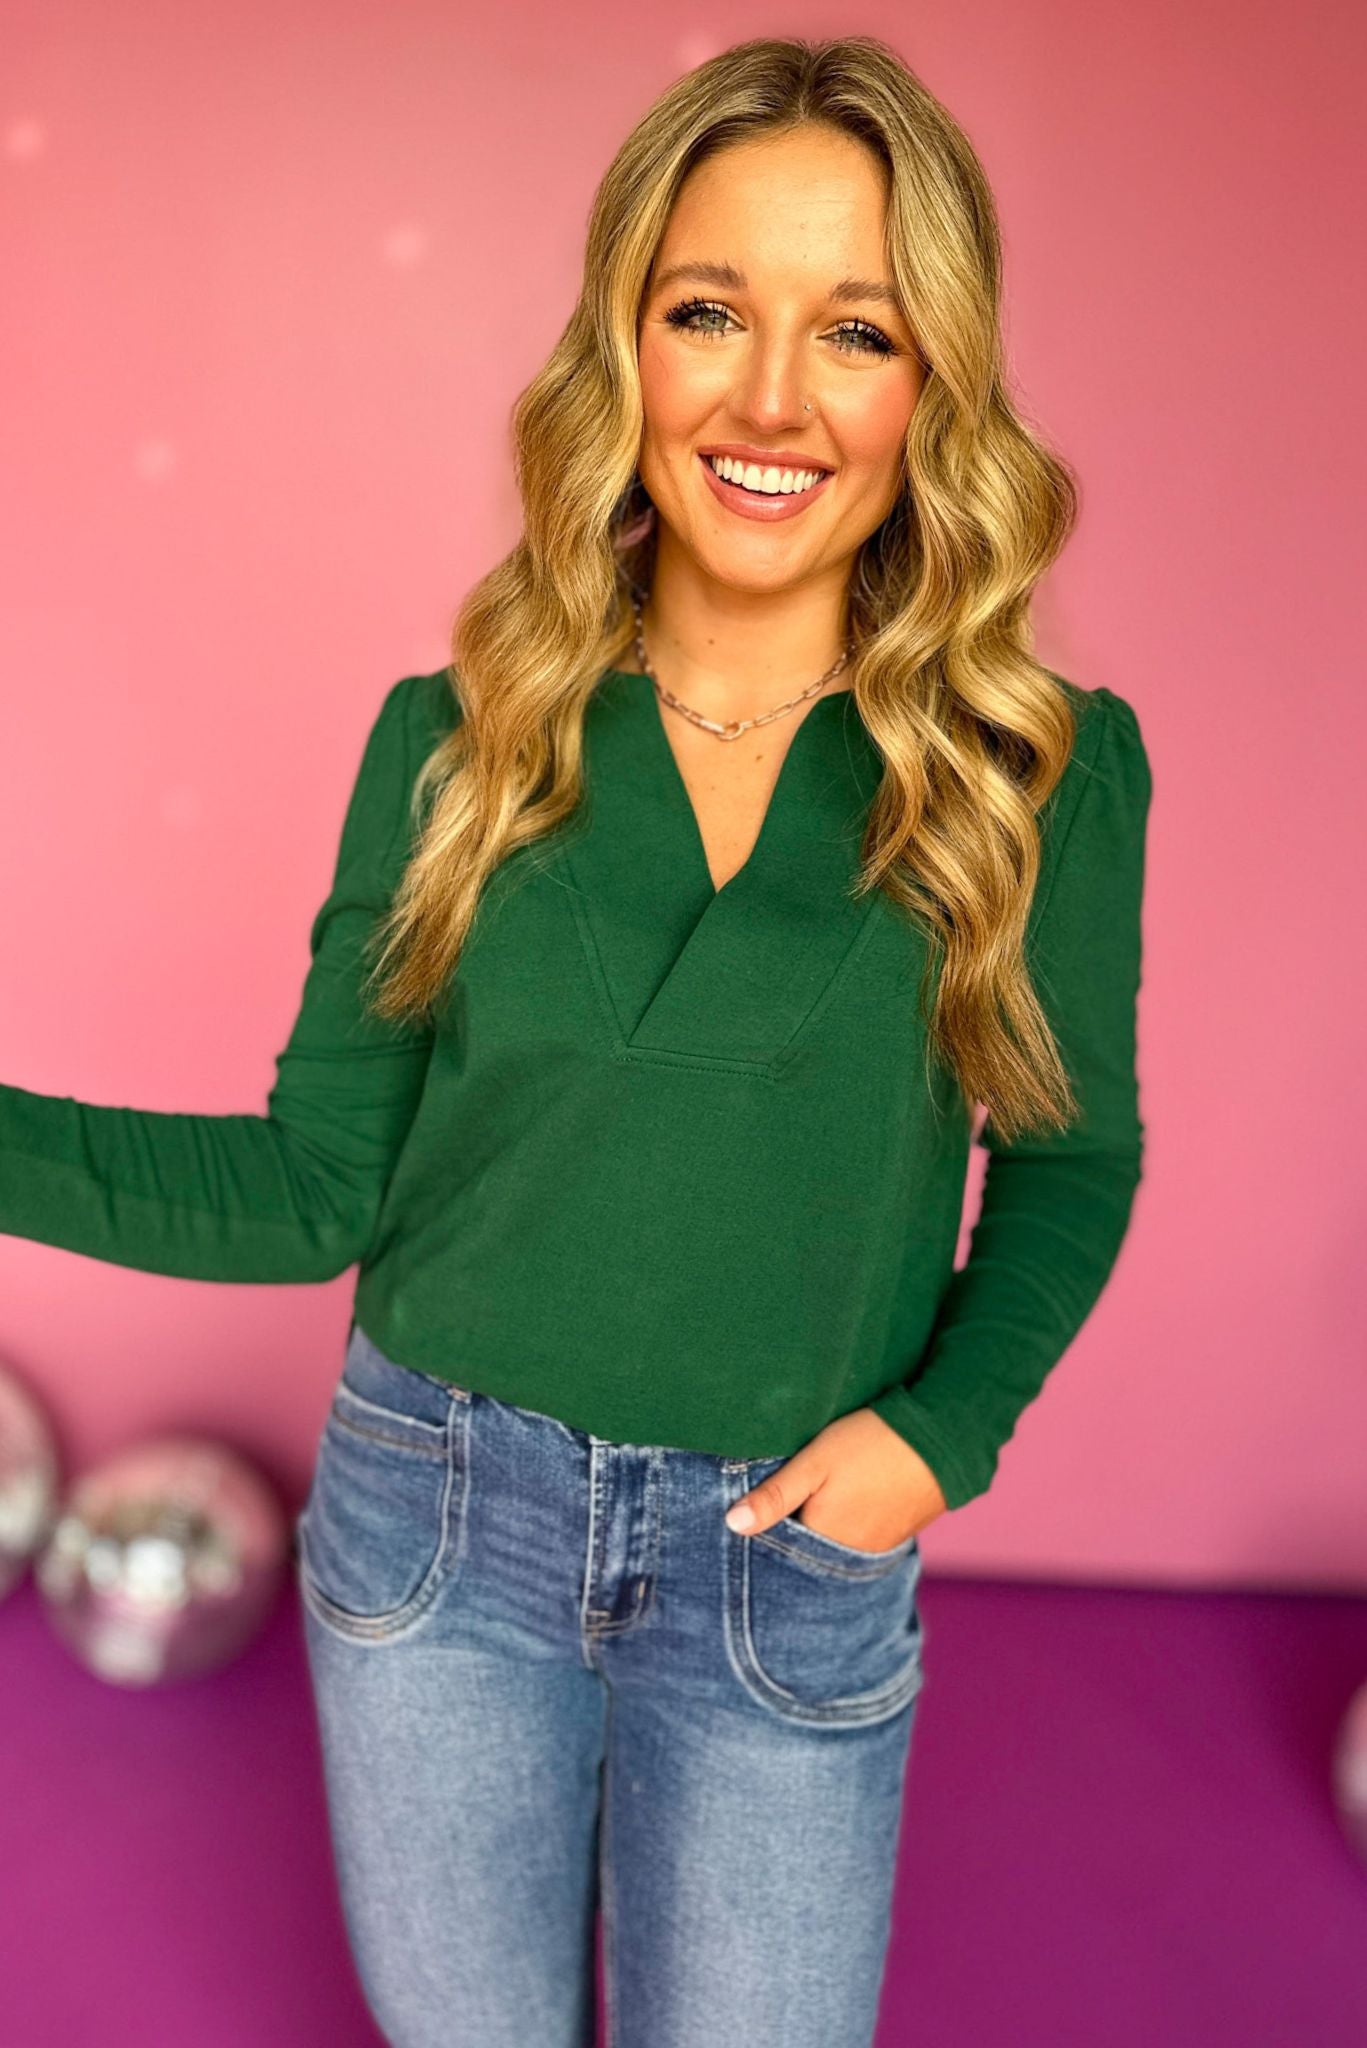 SSYS The Long Sleeve Ellie Top In Hunter Green, must have top, must have style, must have fall, fall collection, fall fashion, elevated style, elevated top, mom style, fall style, shop style your senses by mallory fitzsimmons